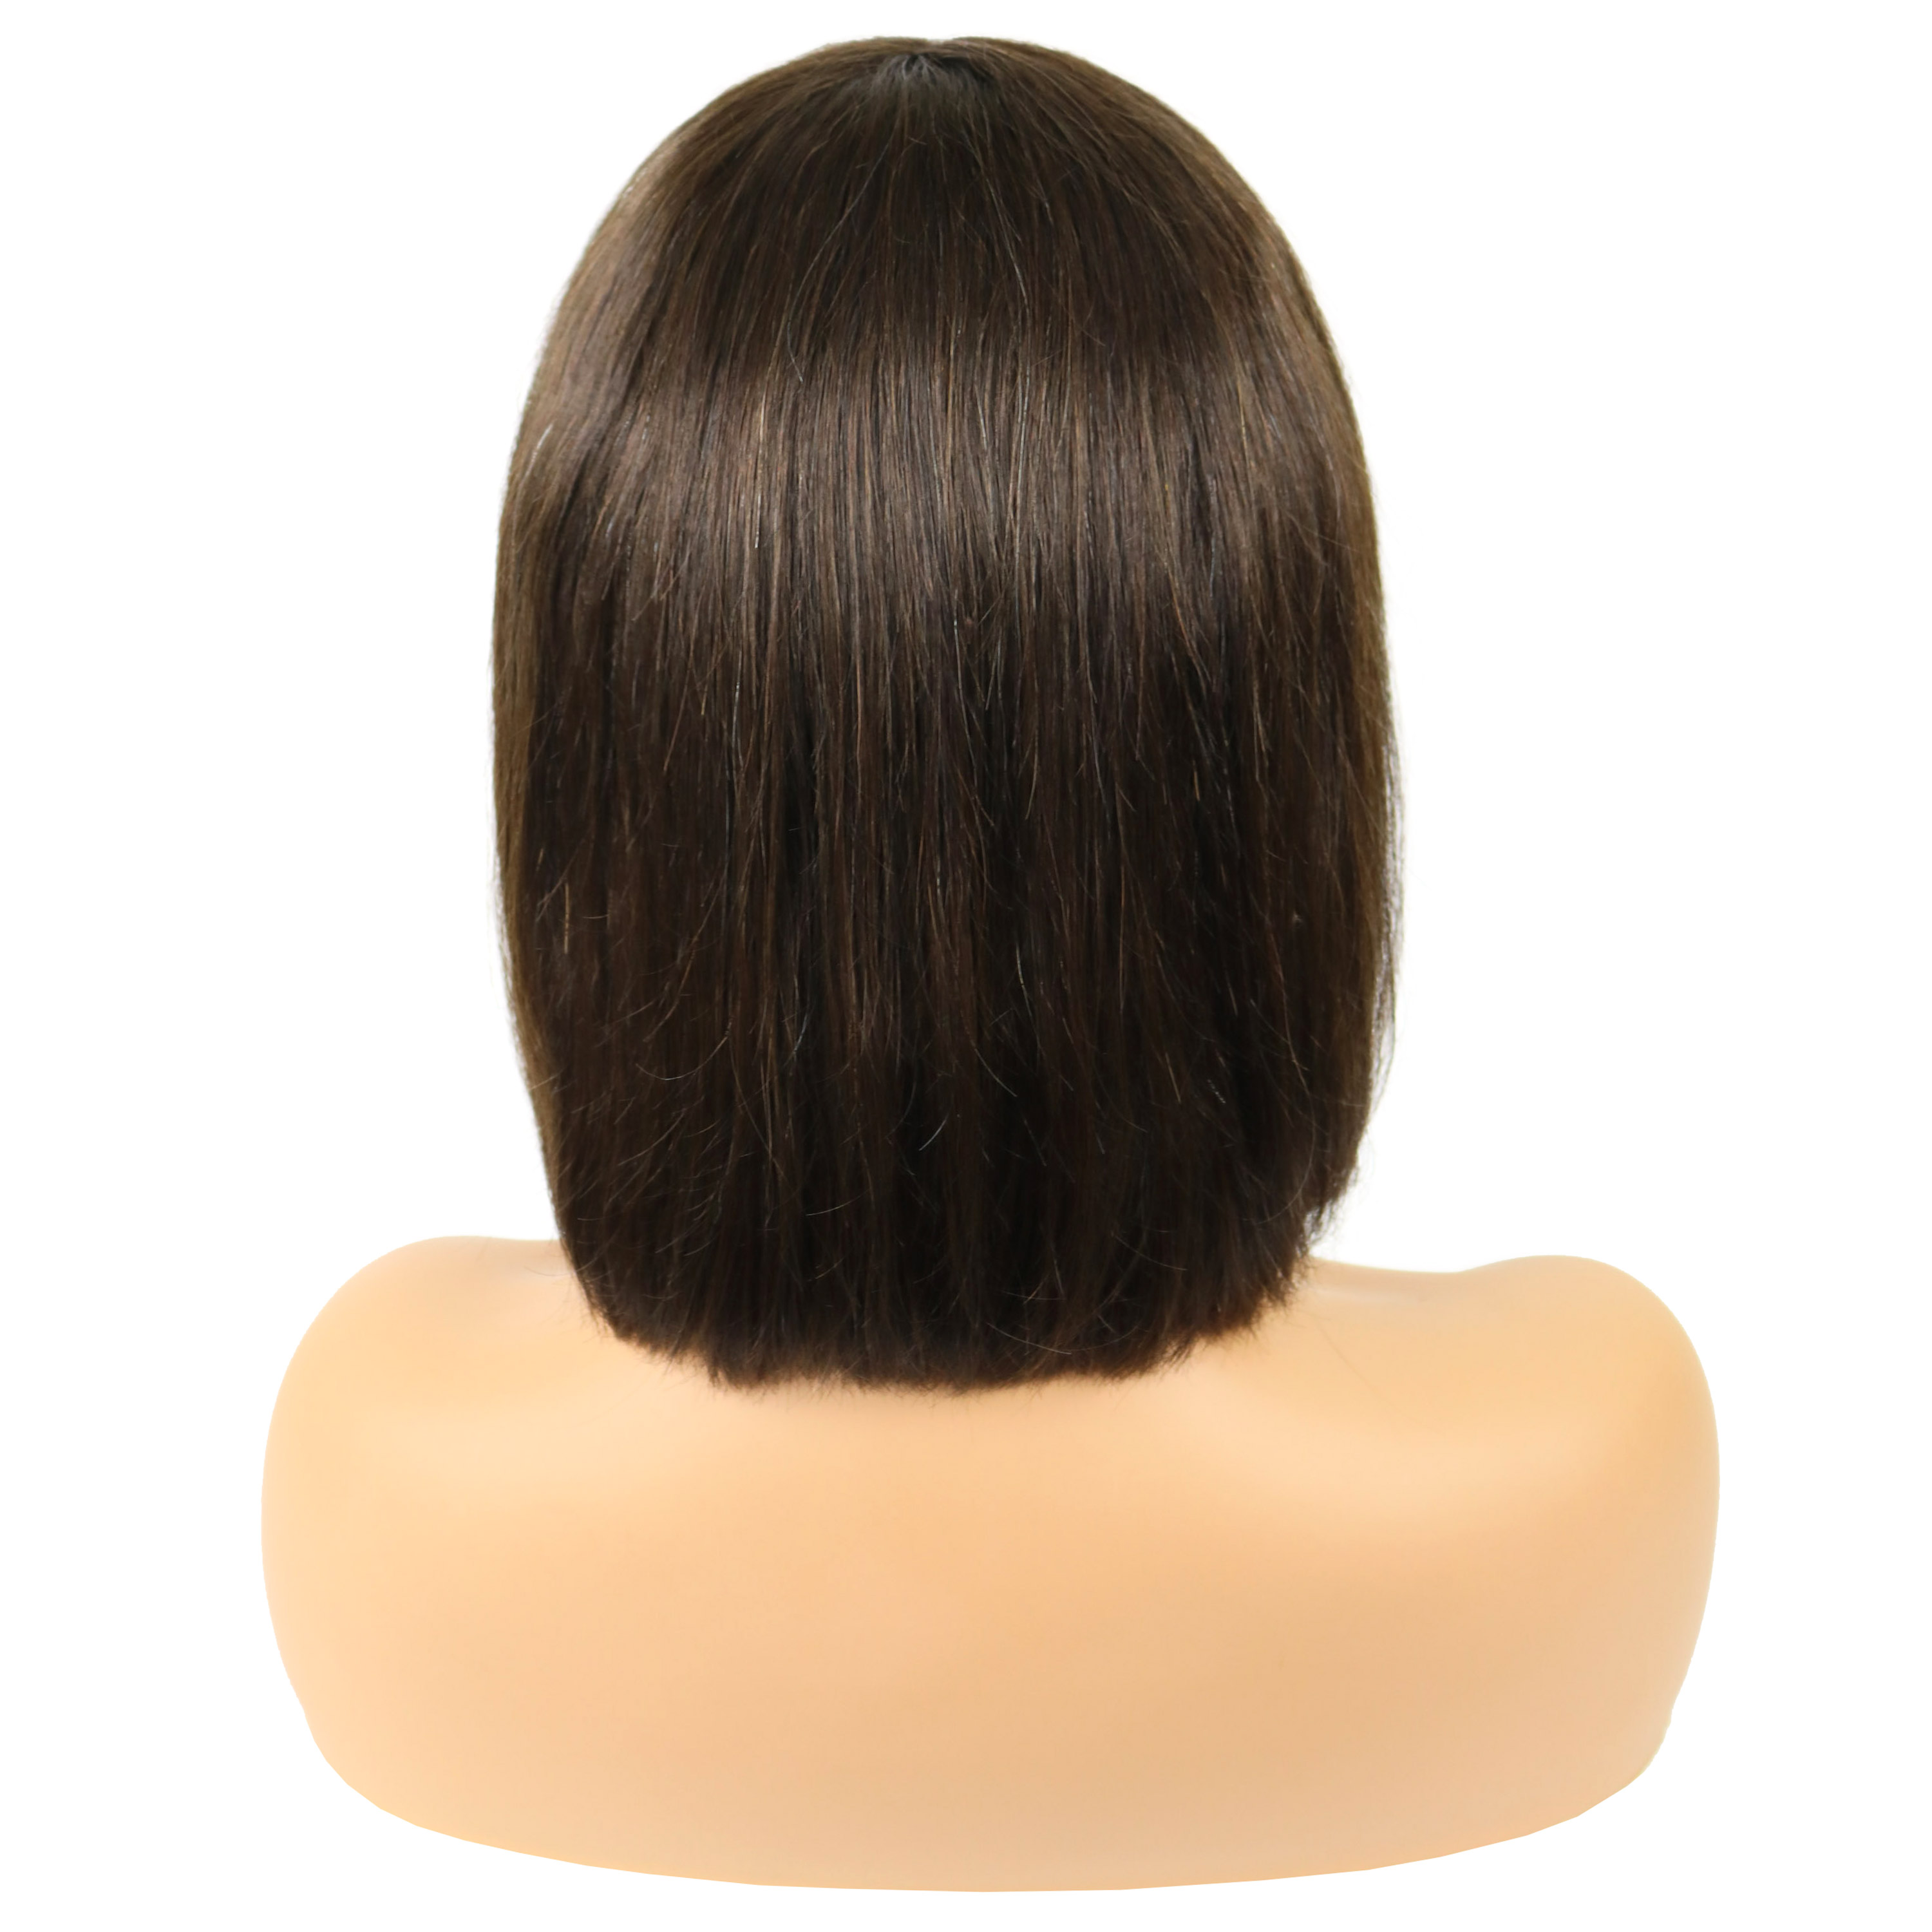 Straight Human Hair Capless 10 Inches 120% Bob Wigs With Full Bangs